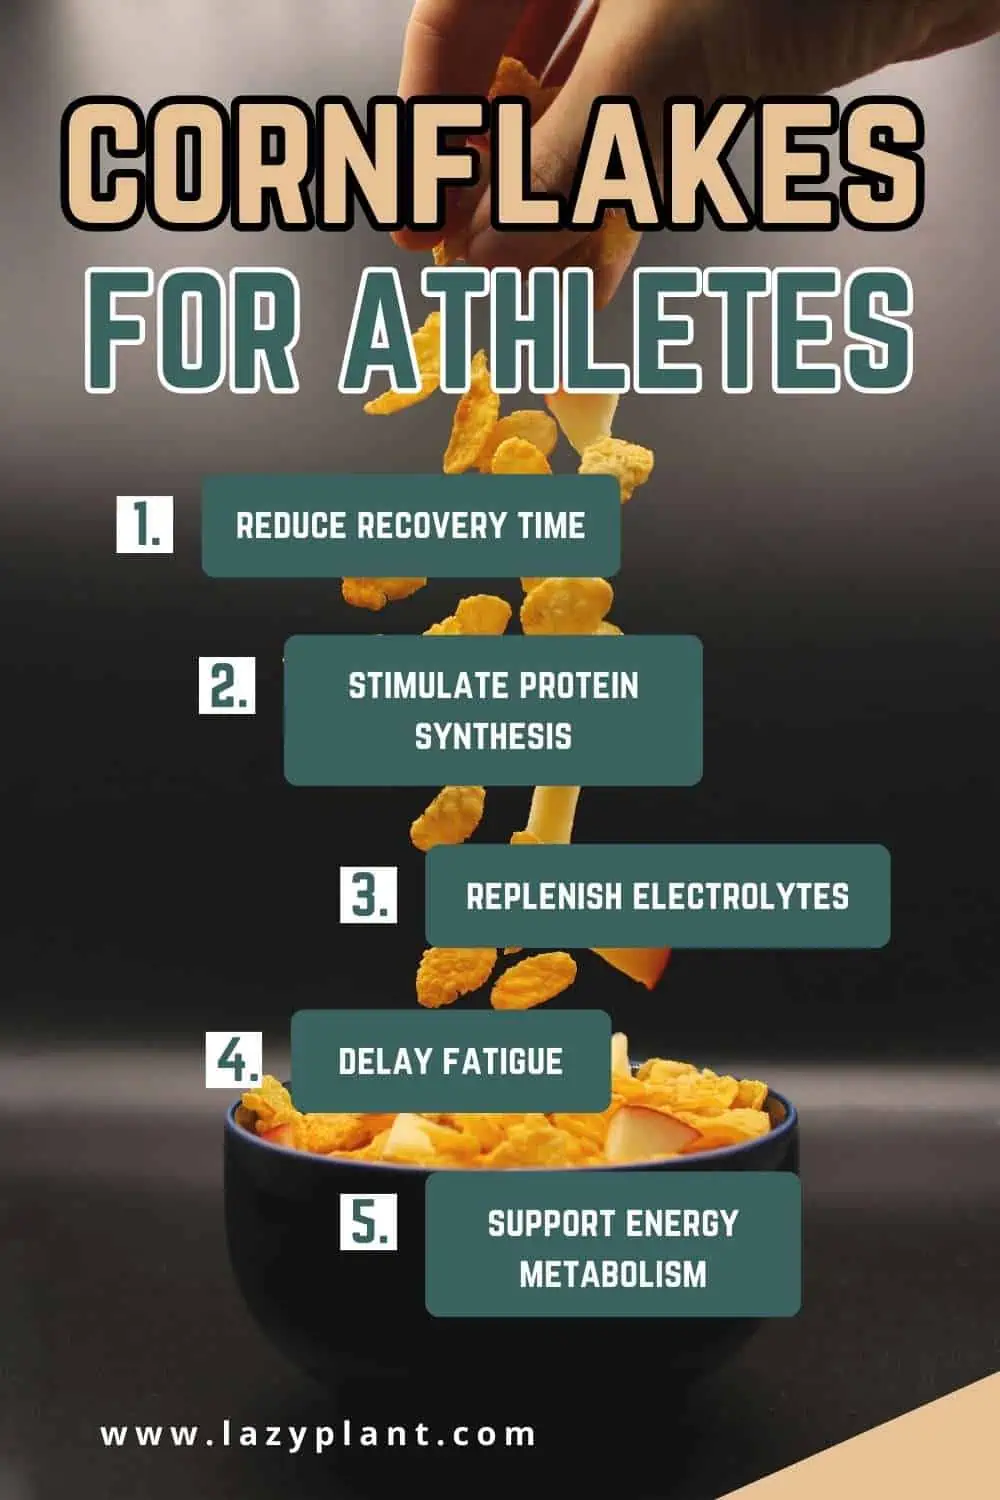 Benefits of cornflakes for athletes.